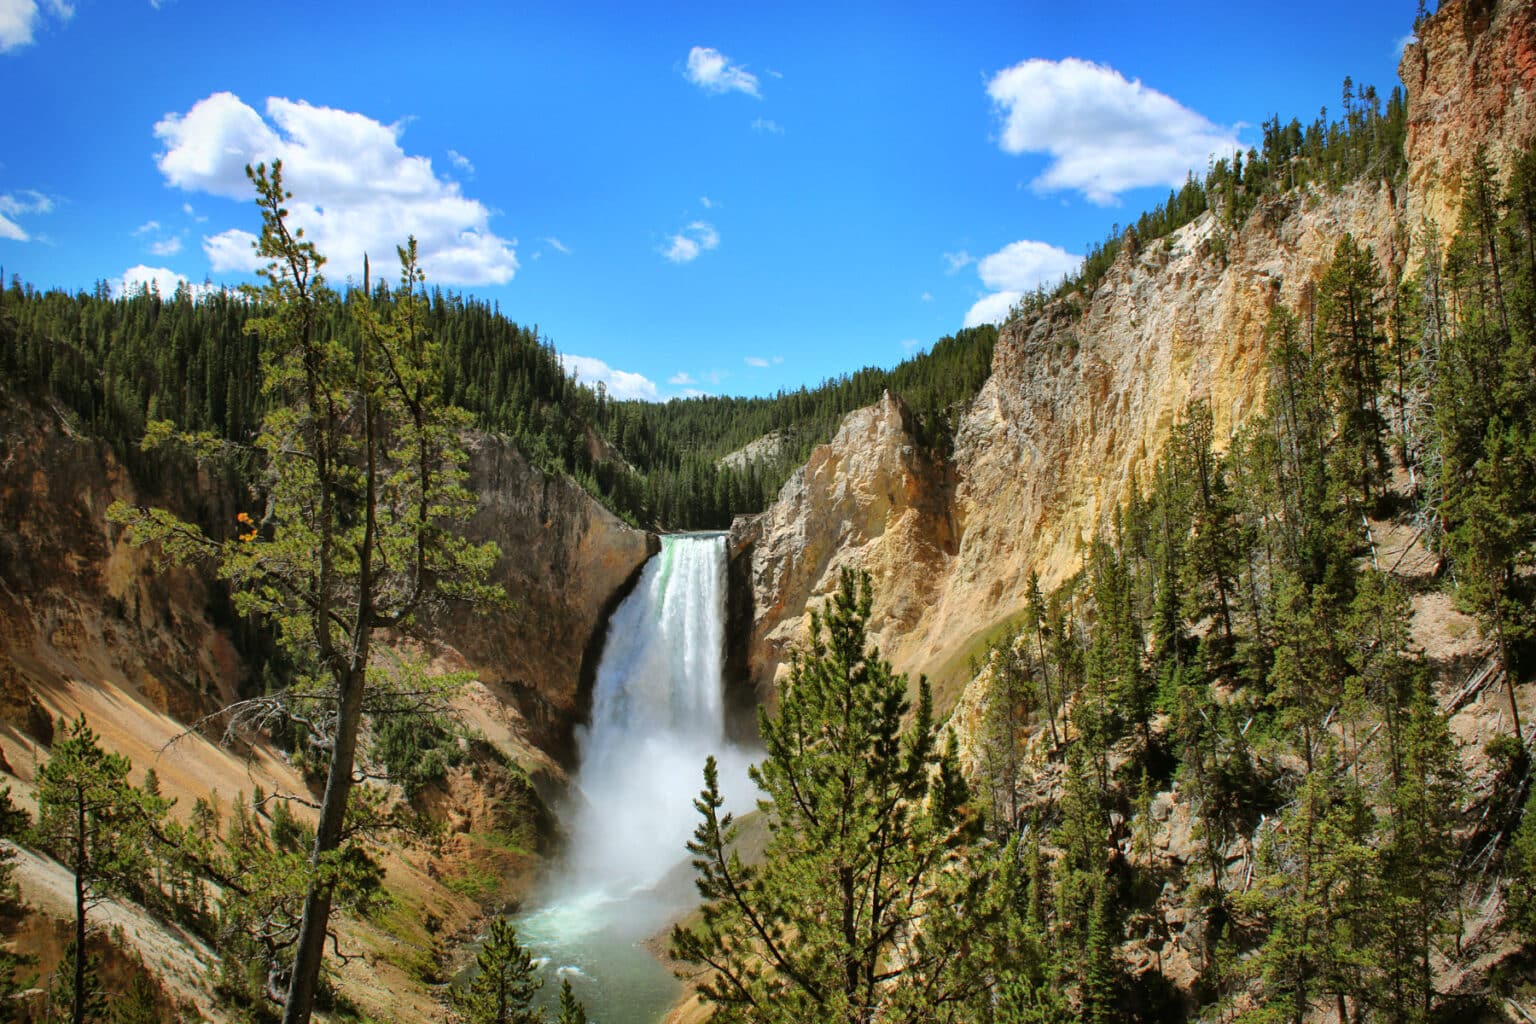 View of Yellowstone Falls in Yellowstone National P ark 